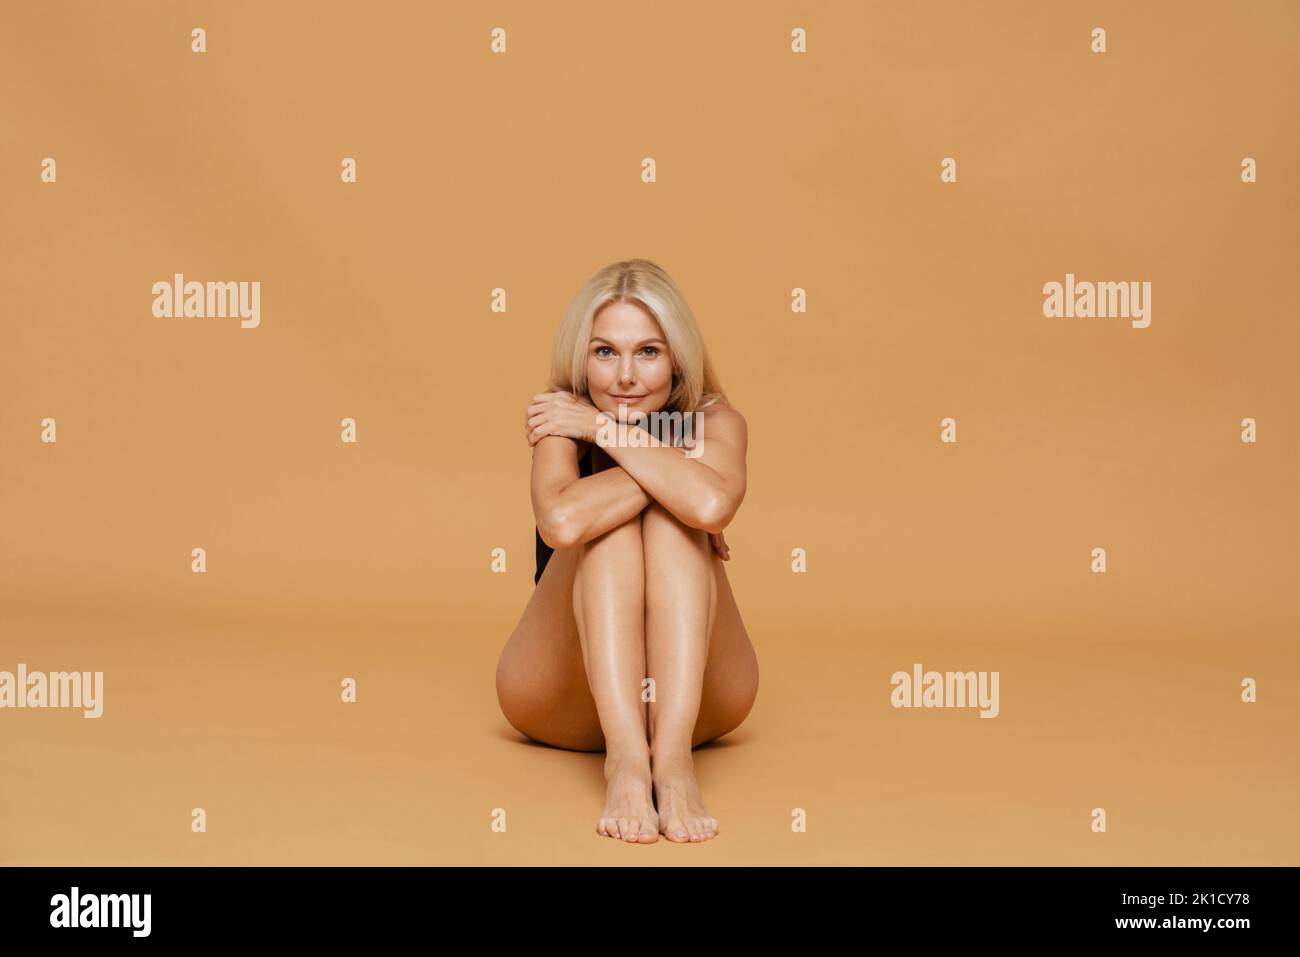 Mature blond beautiful woman wearing bodysuit smiling and posing at camera isolated over yellow background Stock Photo